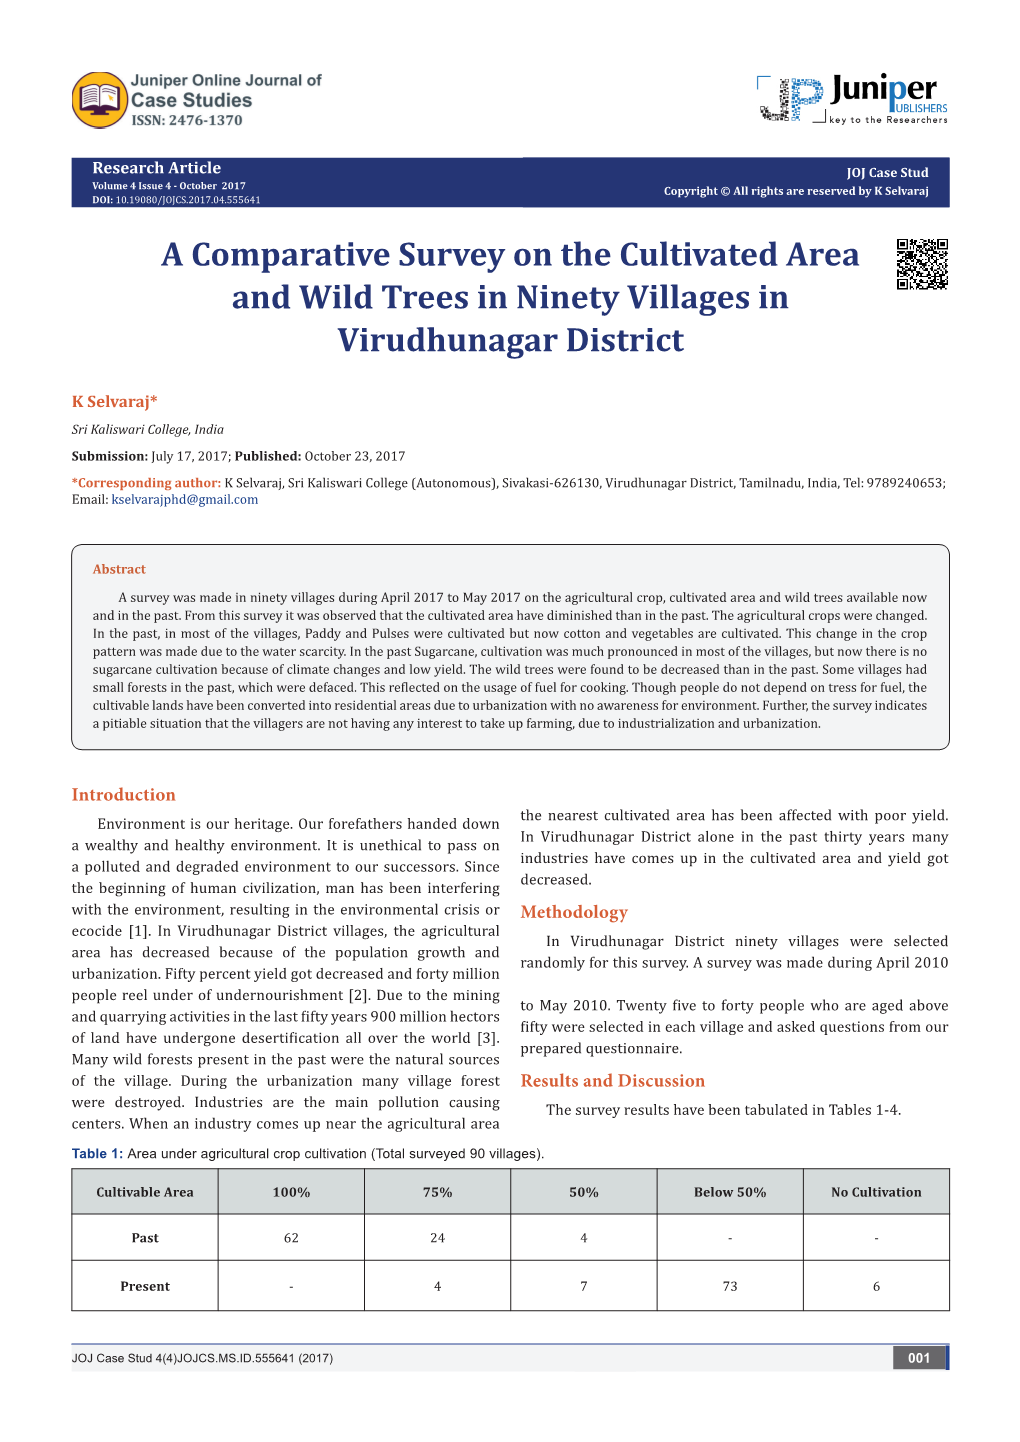 A Comparative Survey on the Cultivated Area and Wild Trees in Ninety Villages in Virudhunagar District